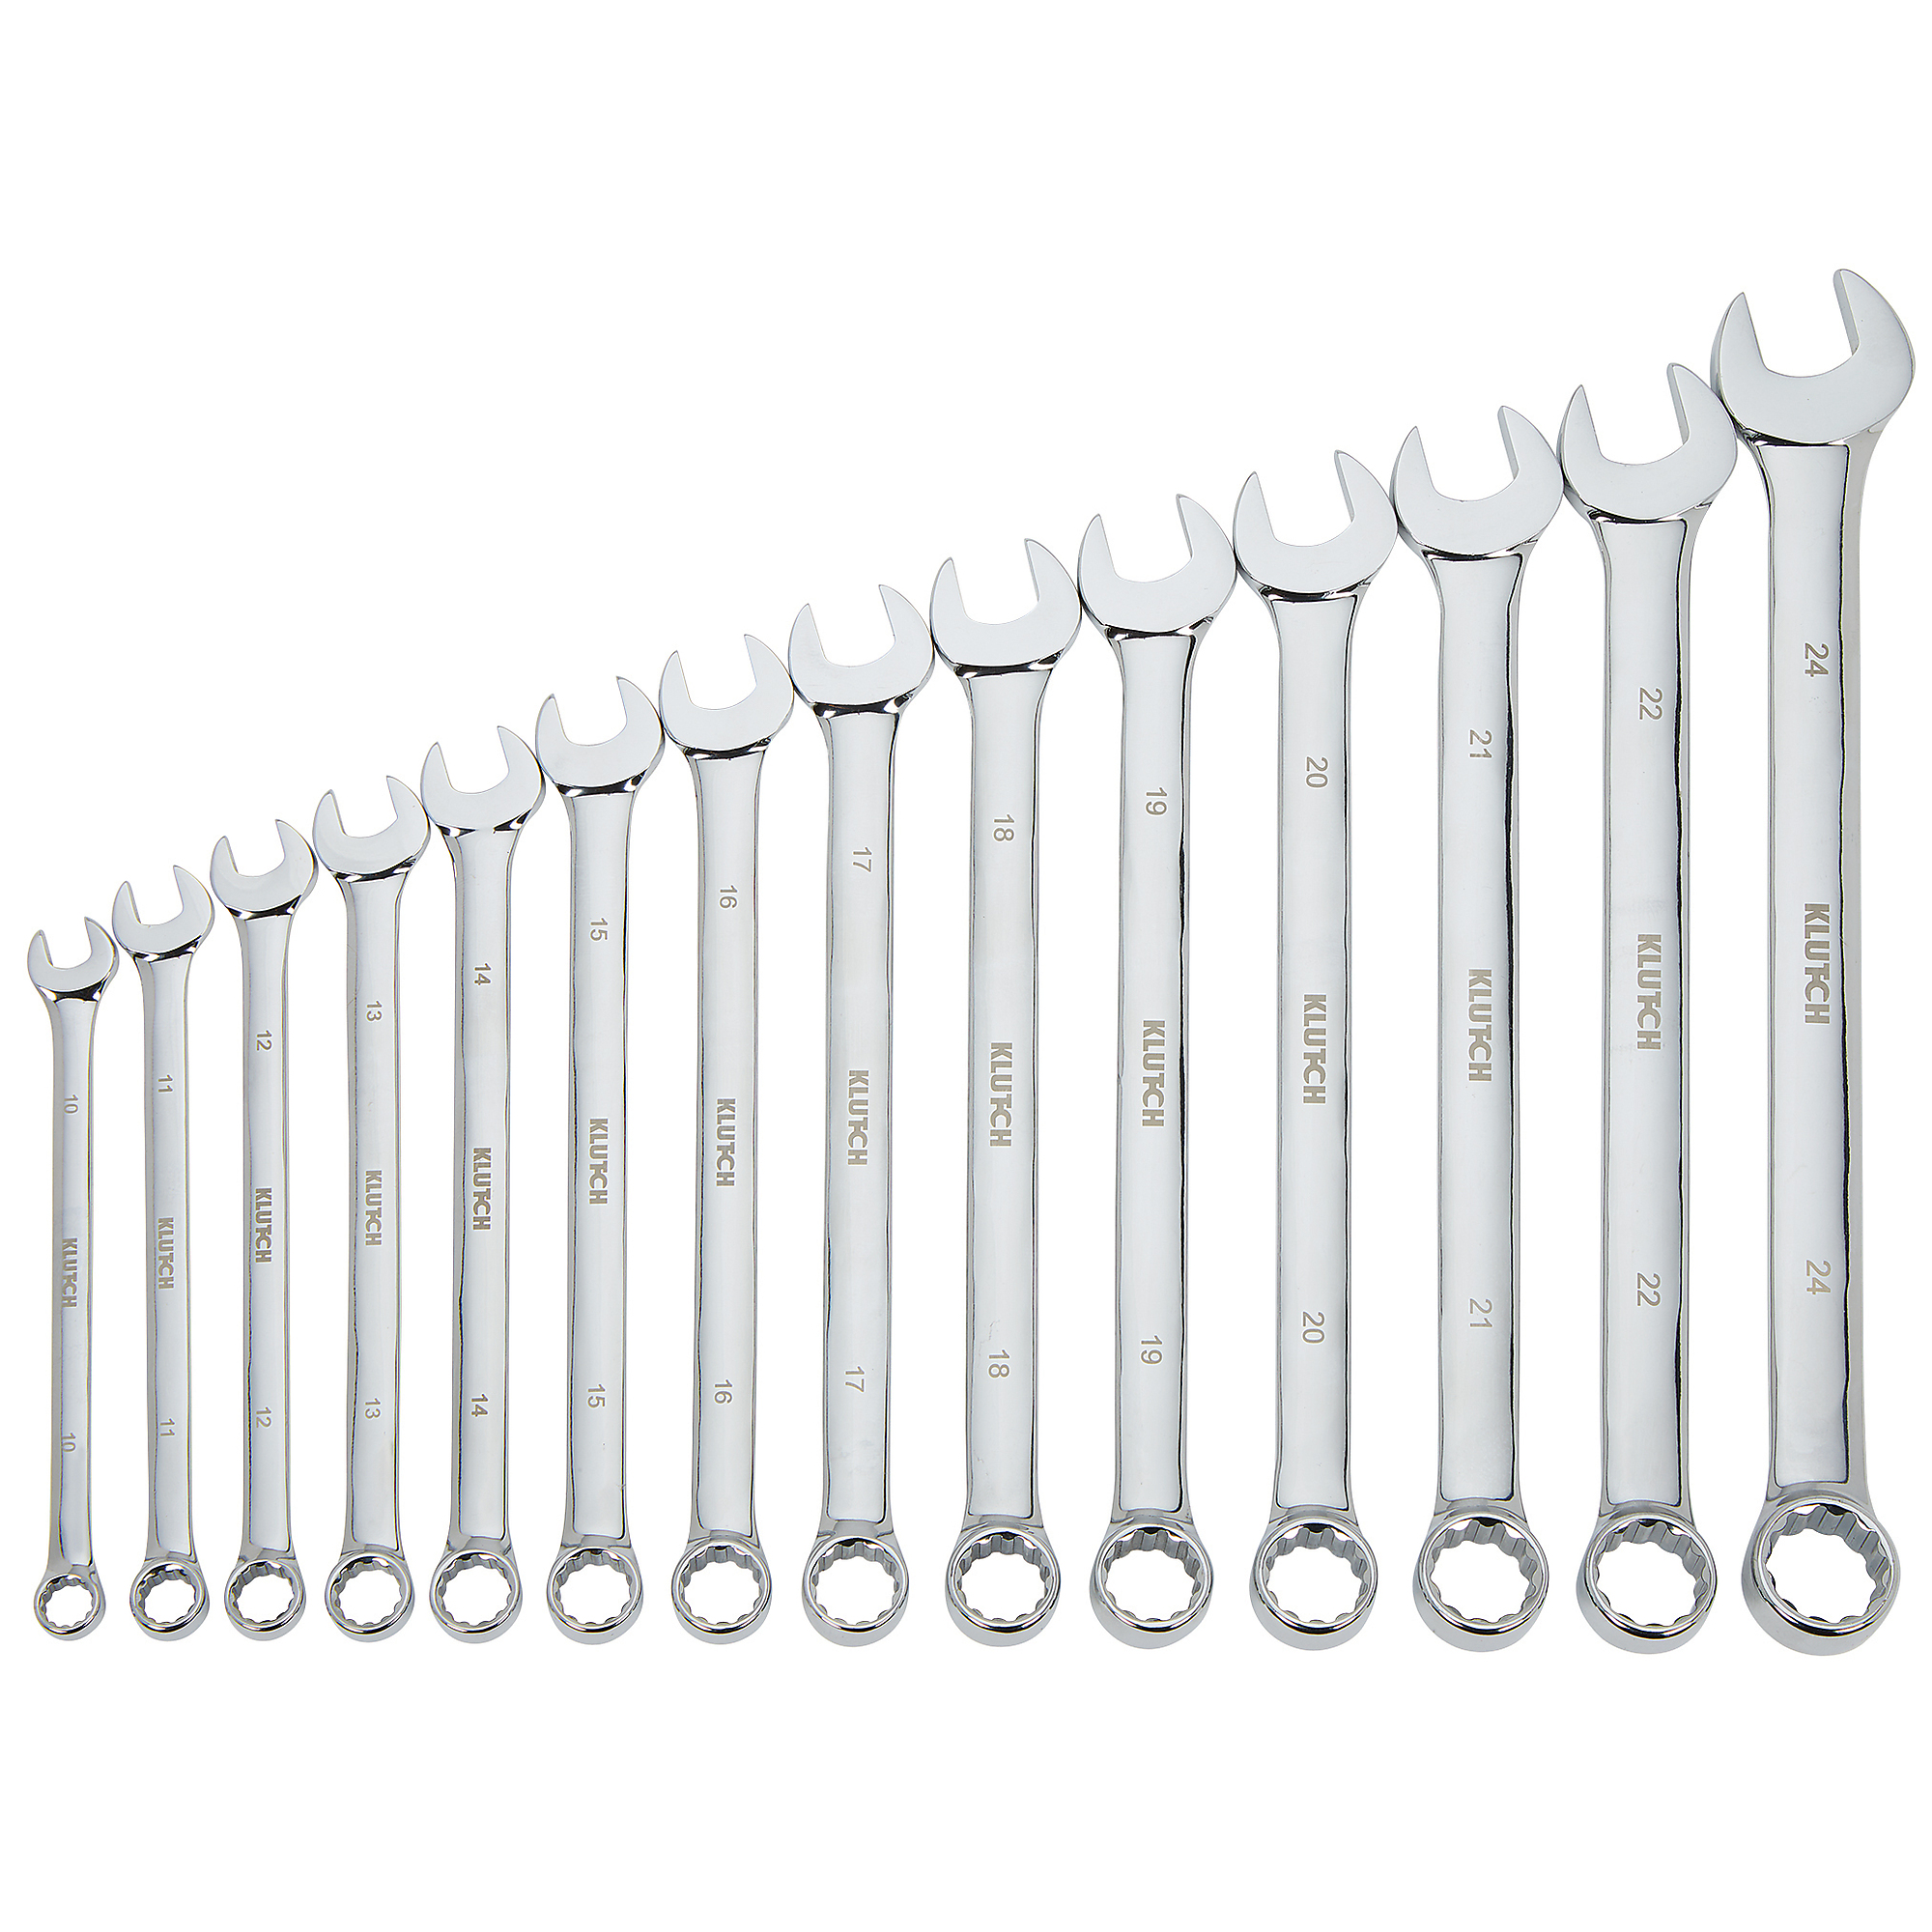 Klutch 14-Piece Metric Extra-Long Wrench Set, Model 34696A